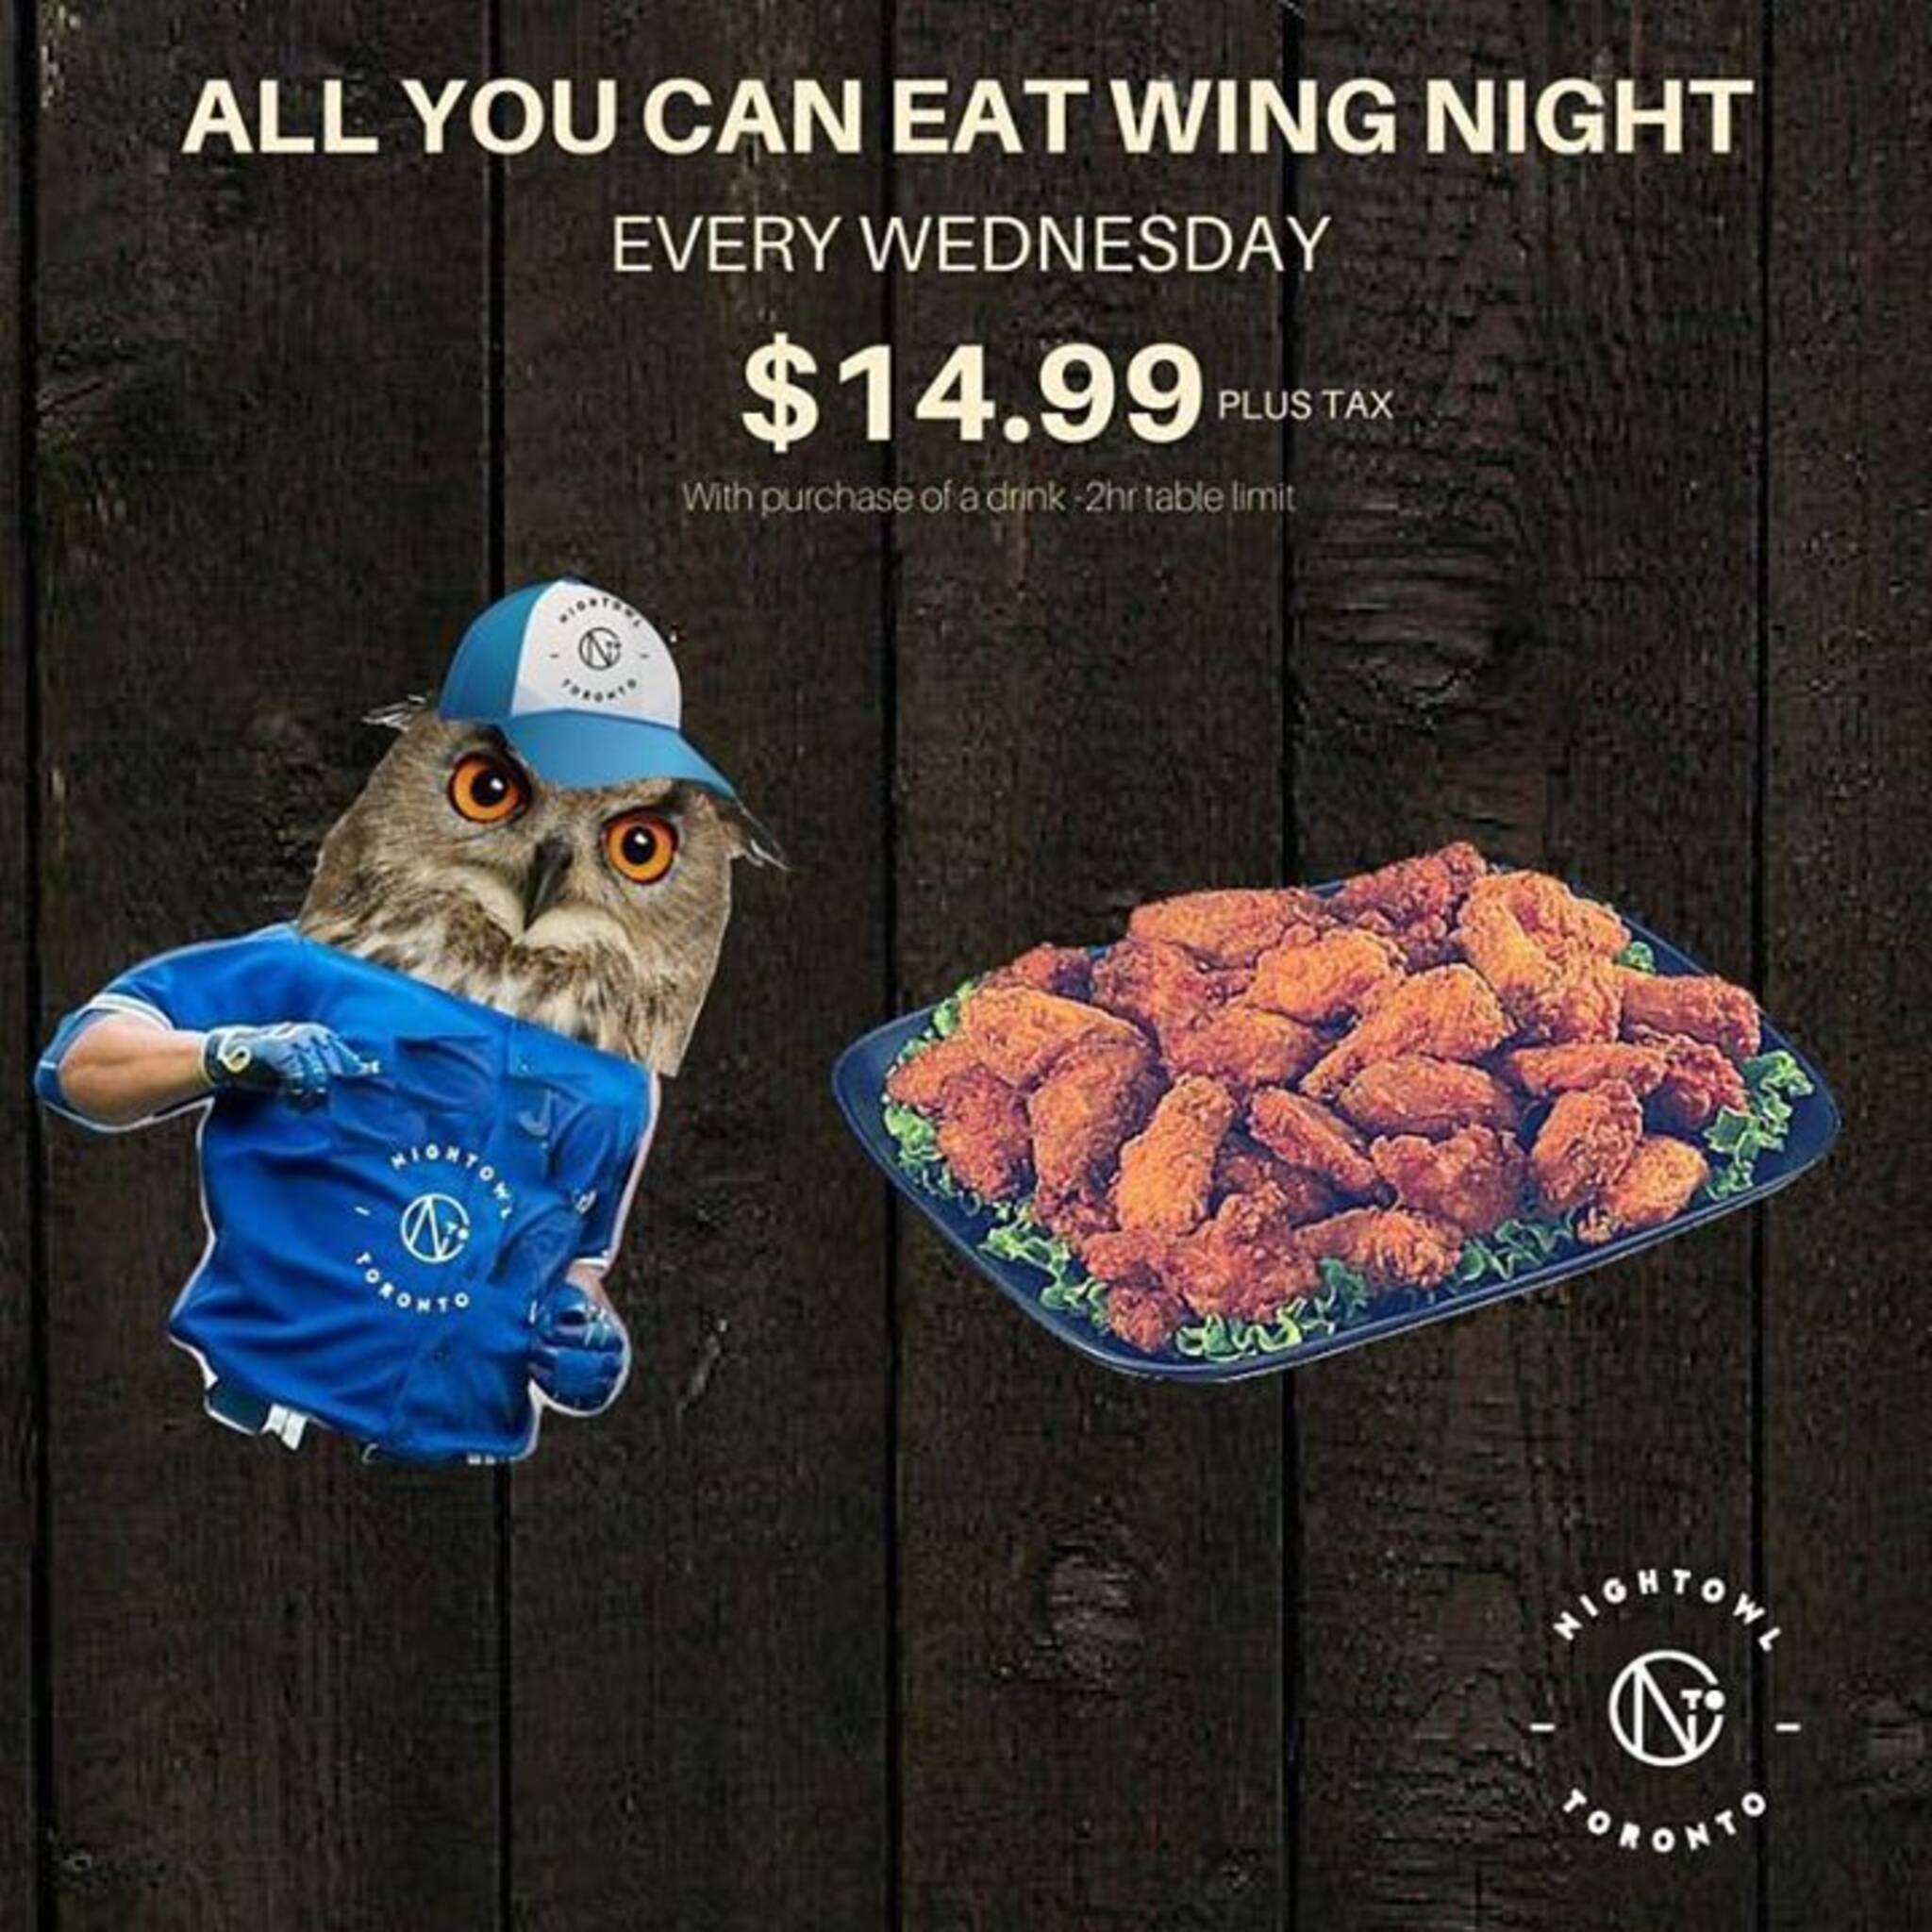 All You Can Eat Wings- Every Wednesday